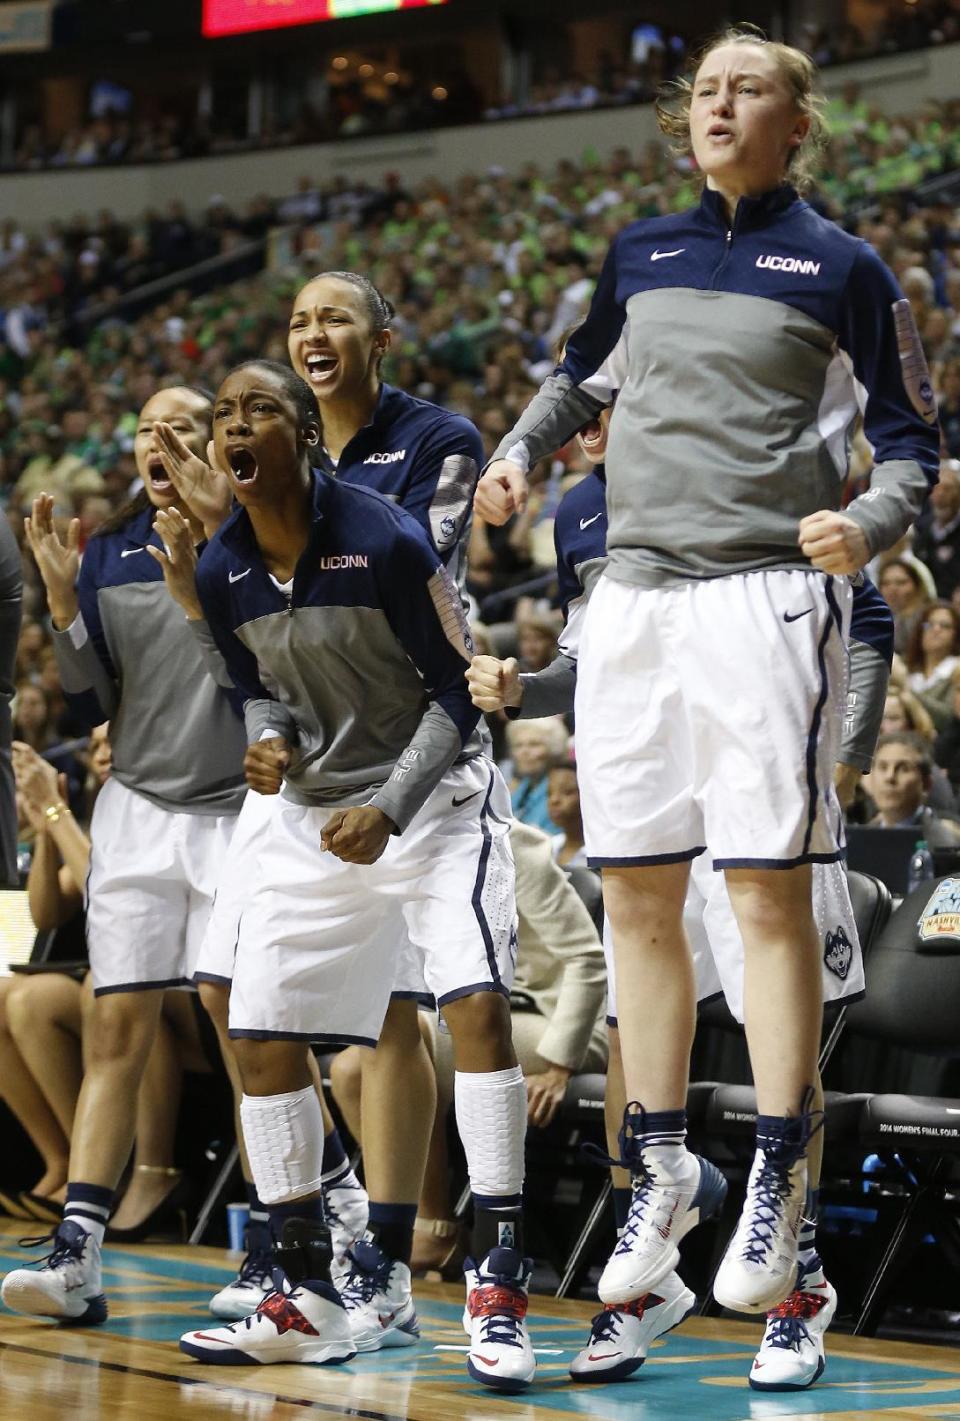 The Connecticut bench cheers against Notre Dame during the first half of the championship game in the Final Four of the NCAA women's college basketball tournament, Tuesday, April 8, 2014, in Nashville, Tenn. (AP Photo/John Bazemore)